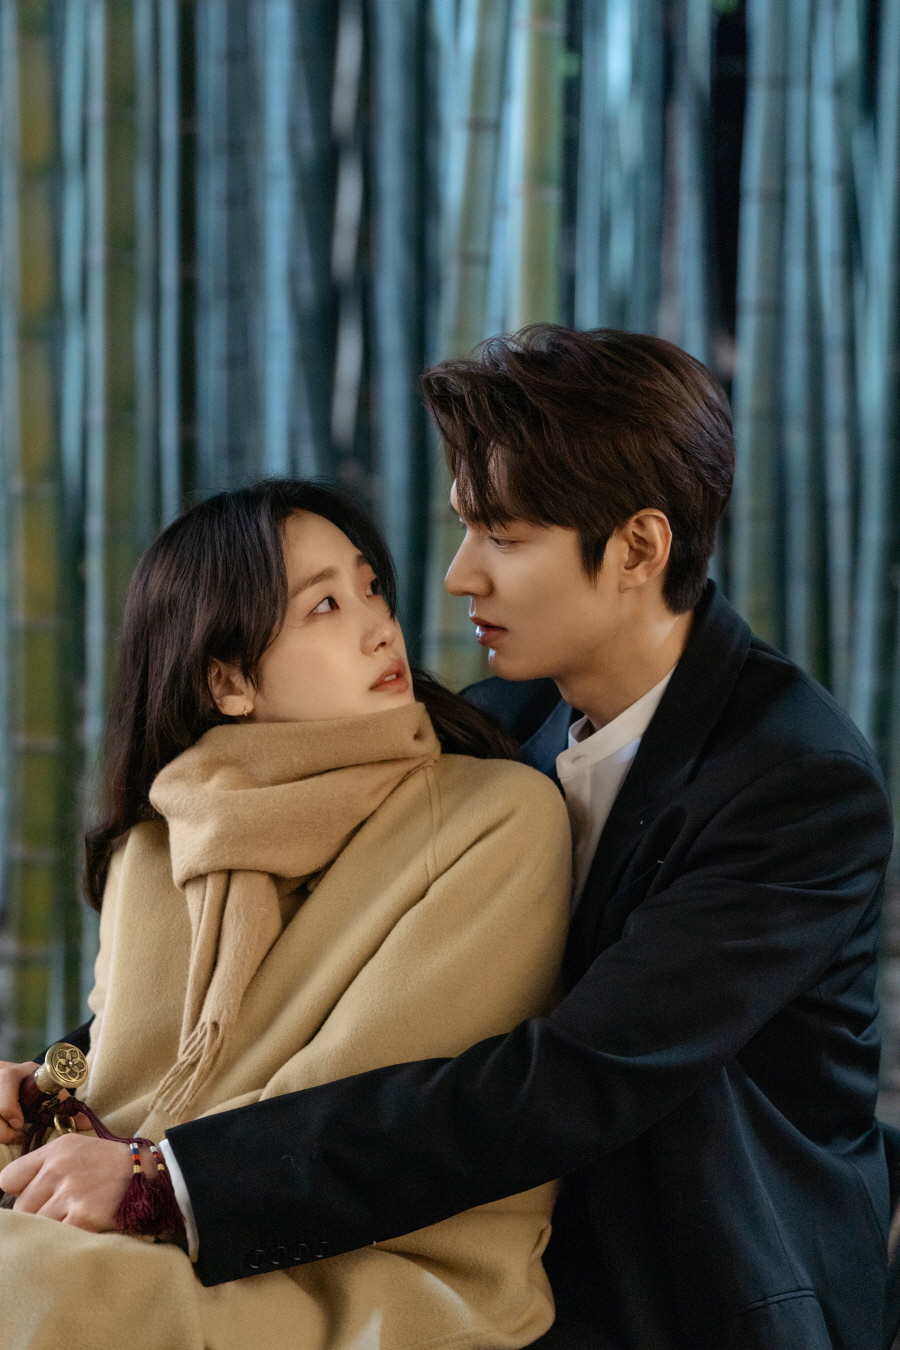 The King - Monarch of Eternity Lee Min-ho and Kim Go-eun showed off the Great Forest Back Hug to Shot with watercolor light and predicted a brilliant Fantasy Romance.SBS gilt drama The King - Monarch of Eternity (playwright Kim Eun-sook/director Baek Sang-hoon, and Jeong Ji-hyun/produced Hwa-An-dam Pictures) is a science and engineering type Korean Empire emperor Lee Gon who wants to close the door () and a text-type South Korea detective Jeong Tae-eul who wants to protect someones life, people and love. It is a parallel World fantasy romance drawn through coordination across the ld.Korean Empire and South Korea are attracting viewers by unfolding a story about fateful love that crosses two coexisting worlds.Above all, Lee Min-ho, who realized that the key to the door of the dimension that could cross the World of Parallel, decided to go back to the Korean Empire and focused his attention on the look of South Korea with Kim Go-eun.In this regard, Lee Min-ho and Kim Go-eun are facing each other closely and are raising expectations by capturing the ultra-close moment together in the forest.In the drama, Igon and Jung Tae are sitting close to each other as if their lips are touching.While Lee is sending a gentle smile and a gentle look toward Jung Tae, Jung Tae is making a surprised look.Two people in the fantastic aura set in bamboo forests are making the hearts of those who see whether they will start a fateful romance that goes beyond excitement.Lee Min-ho and Kim Go-euns Destiny Two Shots were filmed in a bamboo forest in Busan in March.Lee Min-ho and Kim Go-eun have expressed some tension in preparing for this meaningful scene that must convey trembling and excitement at the same time against the fate of being swept away.They were seriously prepared to shoot, carefully reviewing the script with their heads together.Despite the fact that they had to convey the feelings of Lee and Jeong Tae only with their eyes and expressions, the two expressed their throbbing hearts and presented a magical romance atmosphere to the scene.The production company, Hwadam Pictures, said, Lee Min-ho and Kim Go-eun are sincere actors who are discussing to play the emotional line of the character. In the fourth episode of The King - Eternal Monarch to be broadcast today, Korean Empire Egon and South Korea Jung Tae will signal a full-fledged romance. I ask for it.On the other hand, the 4th SBS The King - Eternal Monarch, which is composed of 16 episodes, will be broadcast at 10 pm on the 25th (tonight).iMBC Photo Antham Pictures